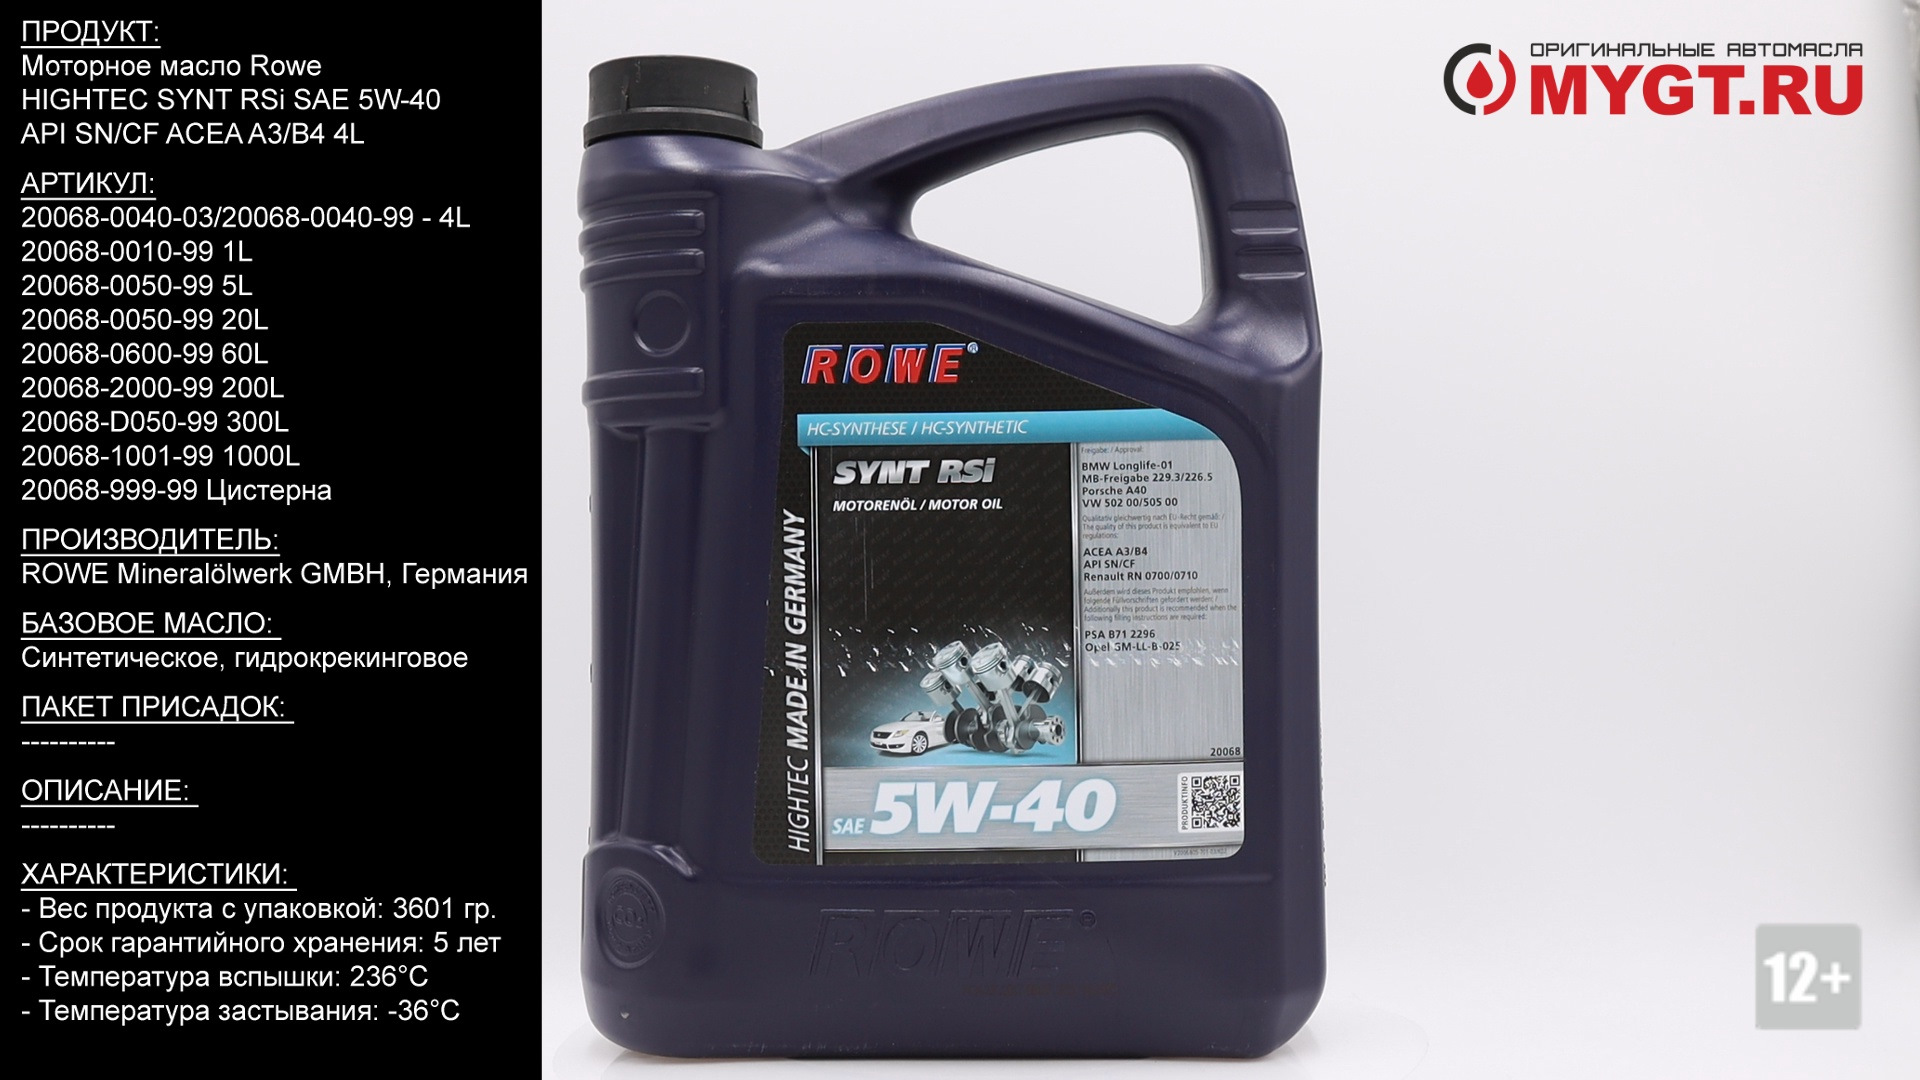 Sae 5 40. Масло Rowe 5w40 Hightec Synt 5-40. Rowe 5w40 RS. Rowe 5w40 Synt RSI. Масло Rowe Hightec Synt RSI 5w40.